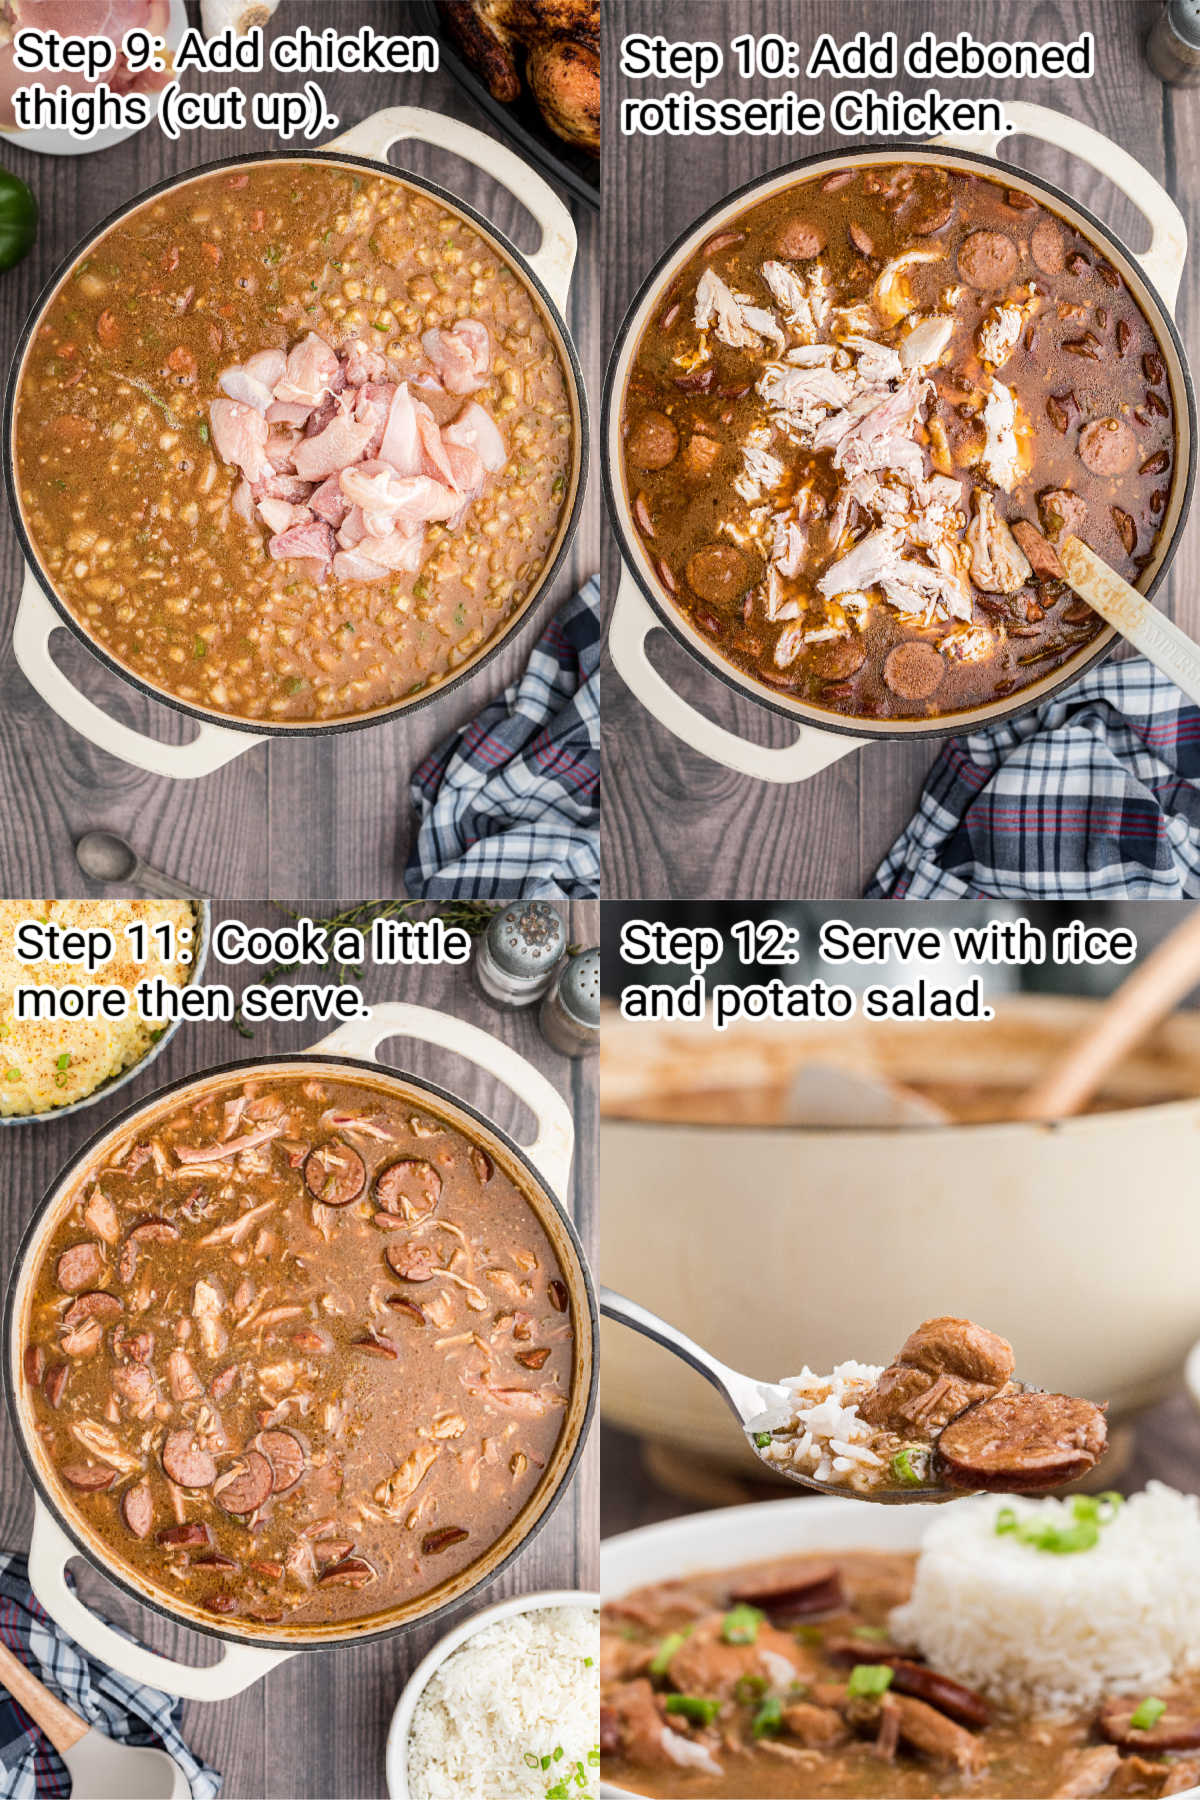 four images showing steps of how to make a chicken and sausage gumbo, this is steps 9 through 12.